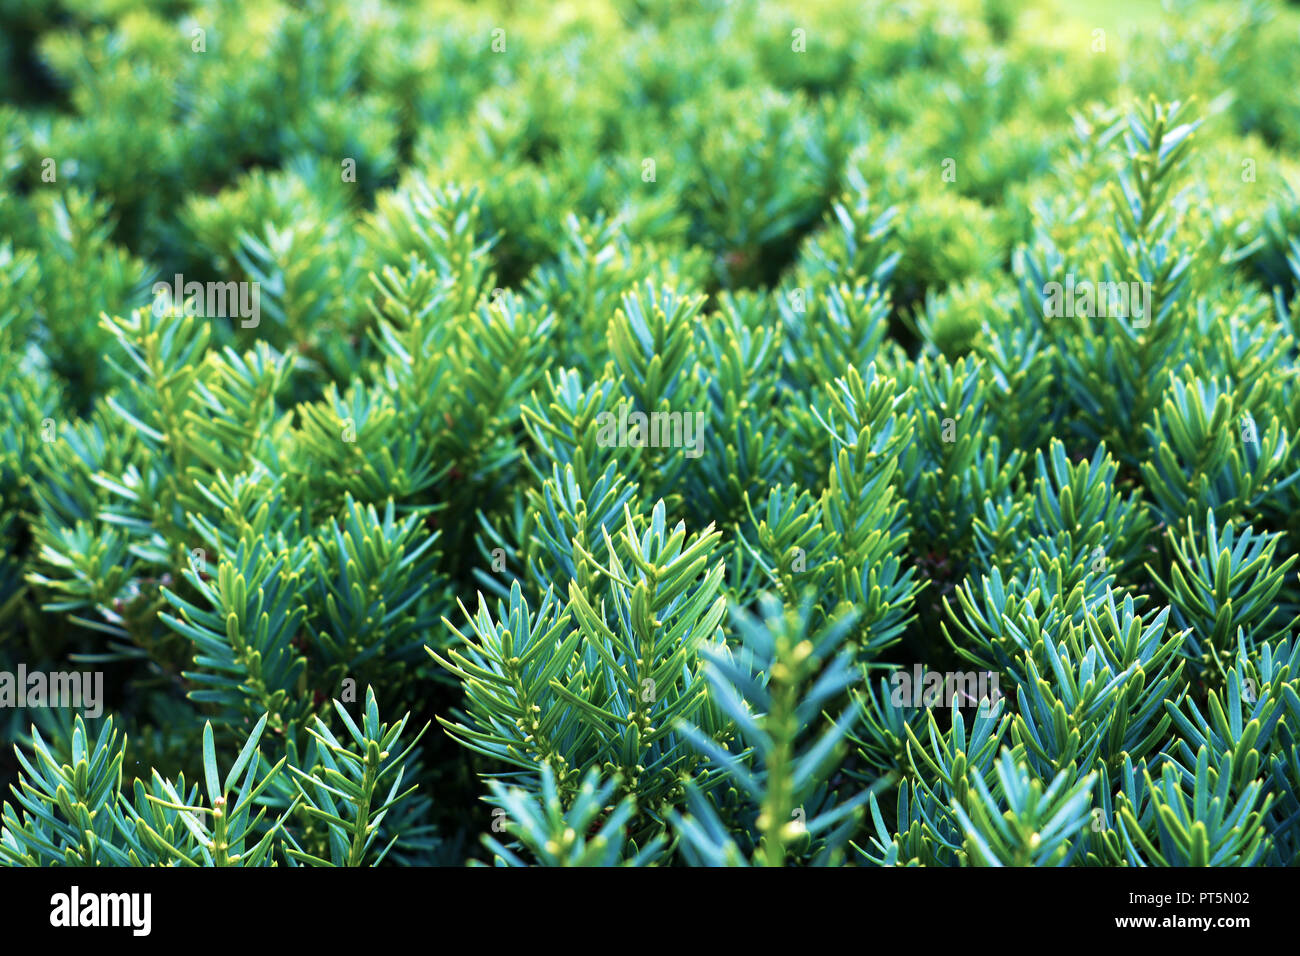 Popular ornamental plants green juniper. It can be used as a background close - up. Stock Photo